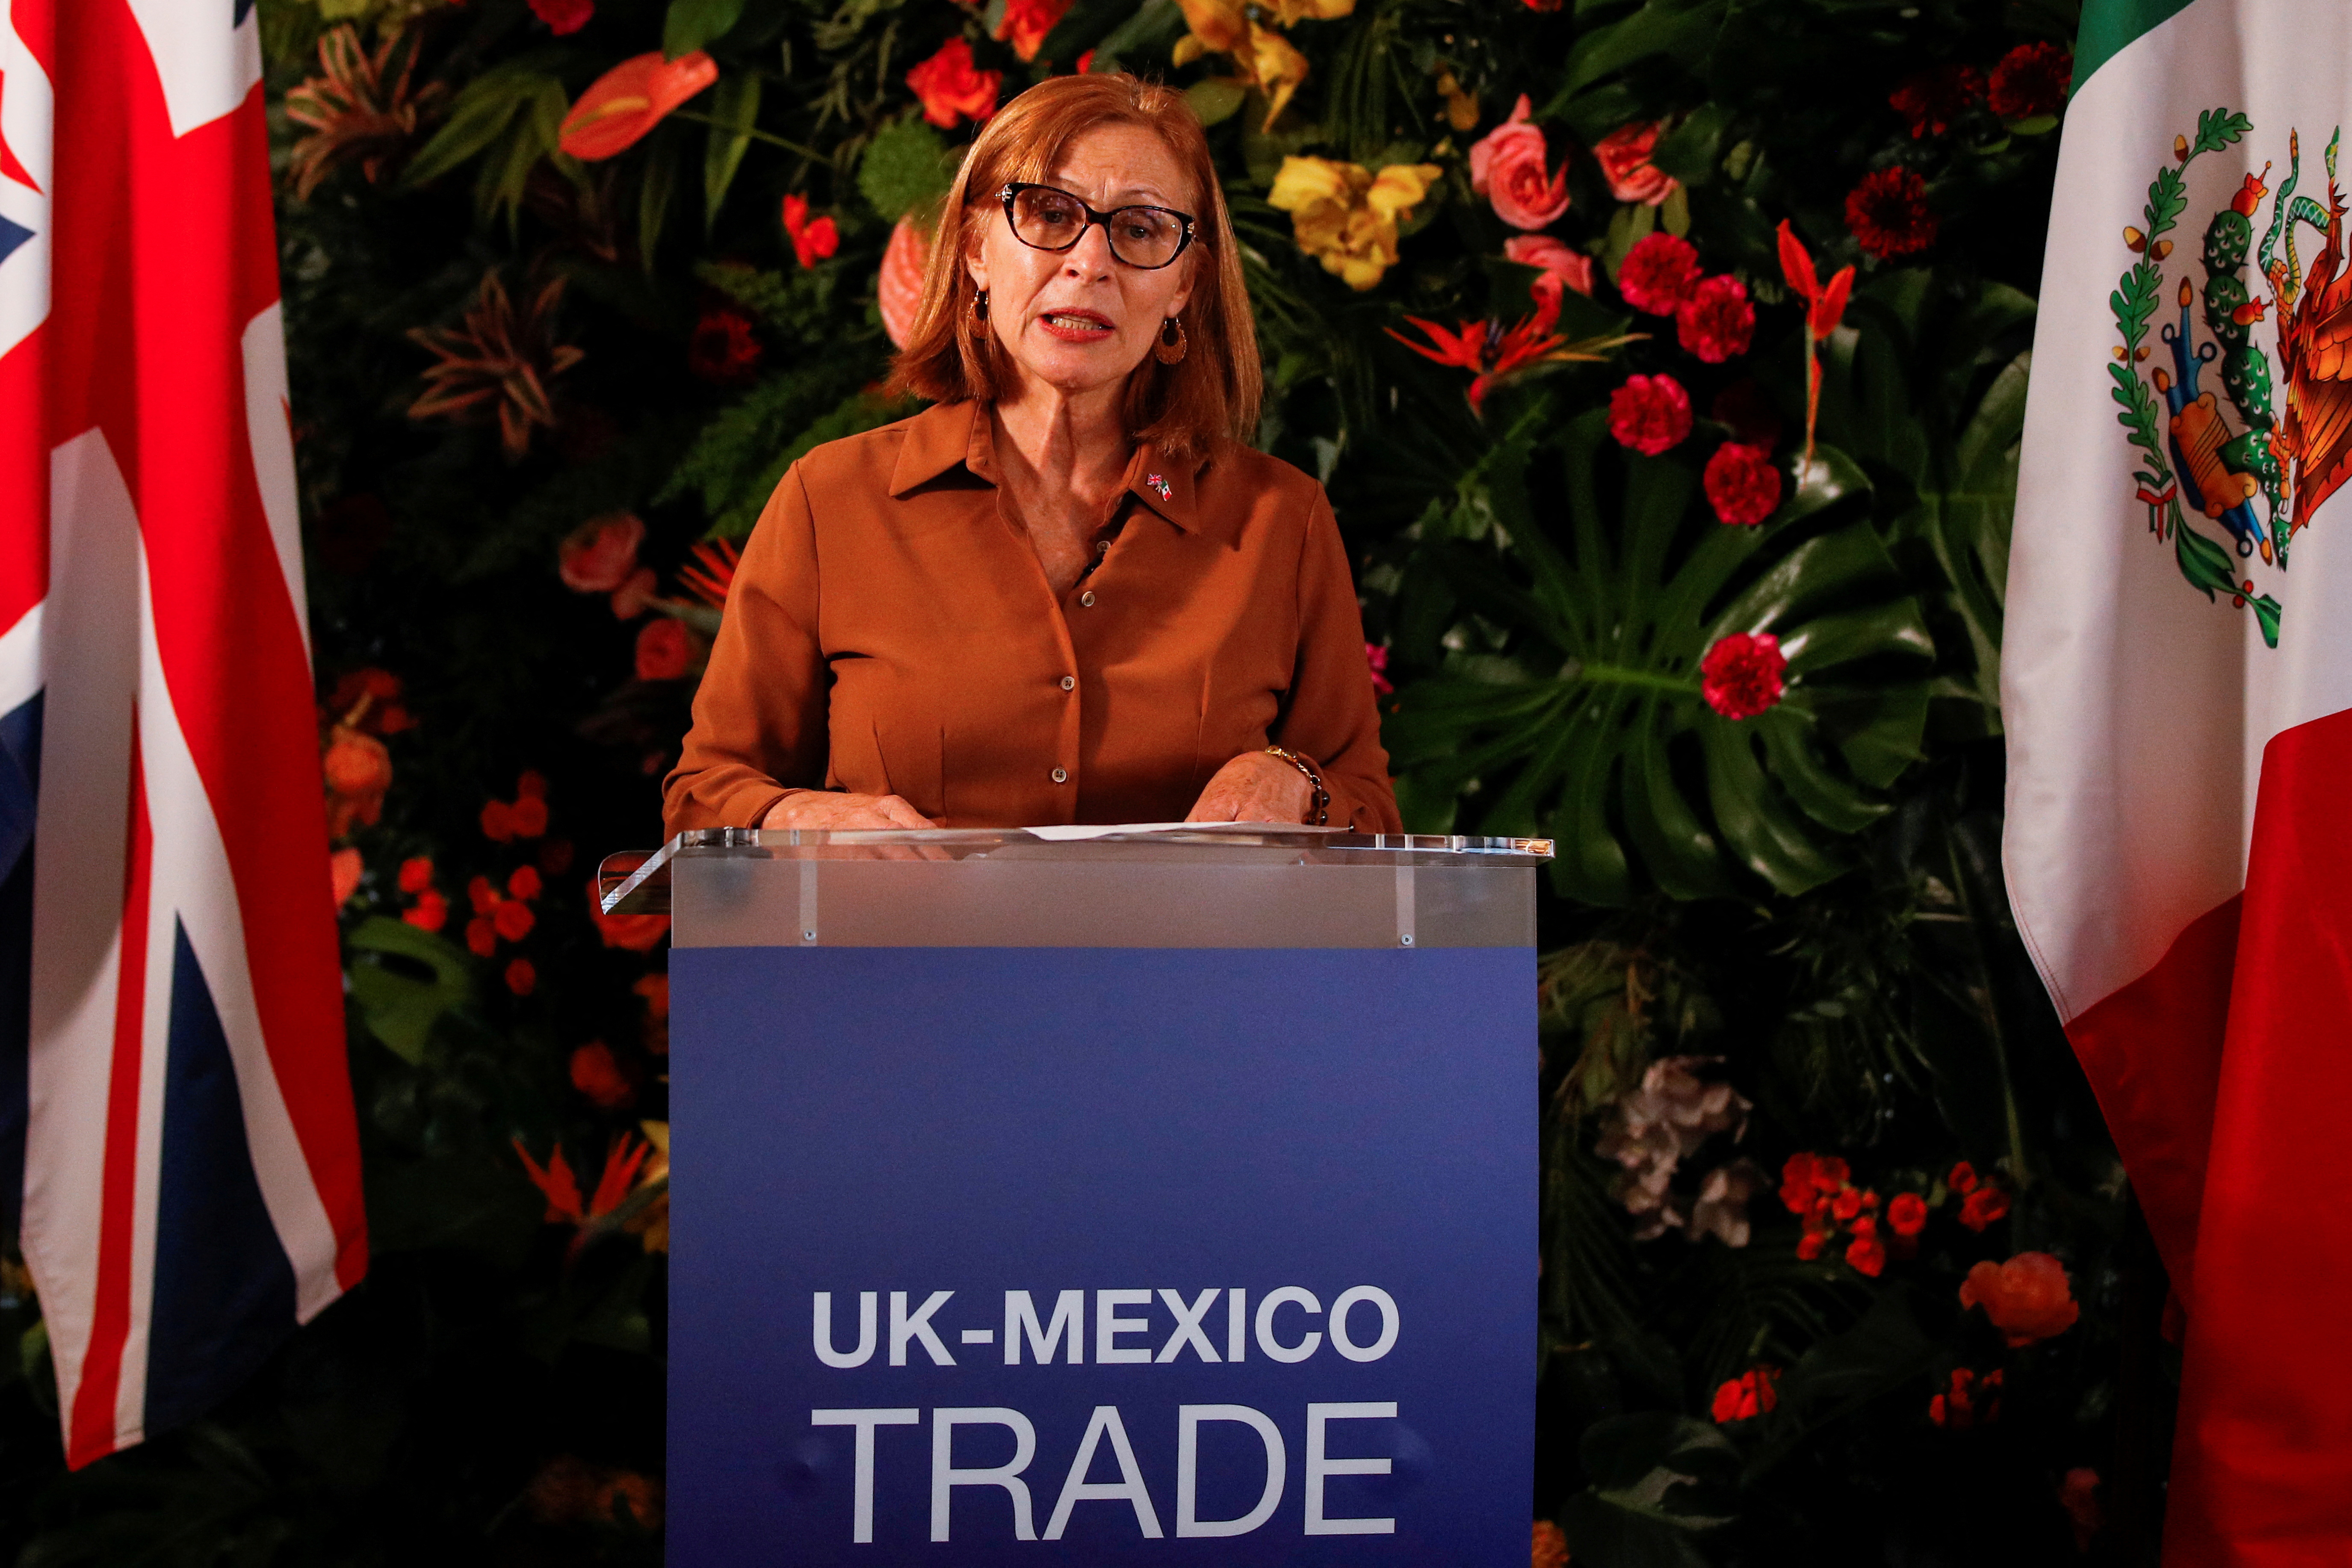 British International Trade Secretary Trevelyan meets with Mexican Economy Minister Clouthier in London